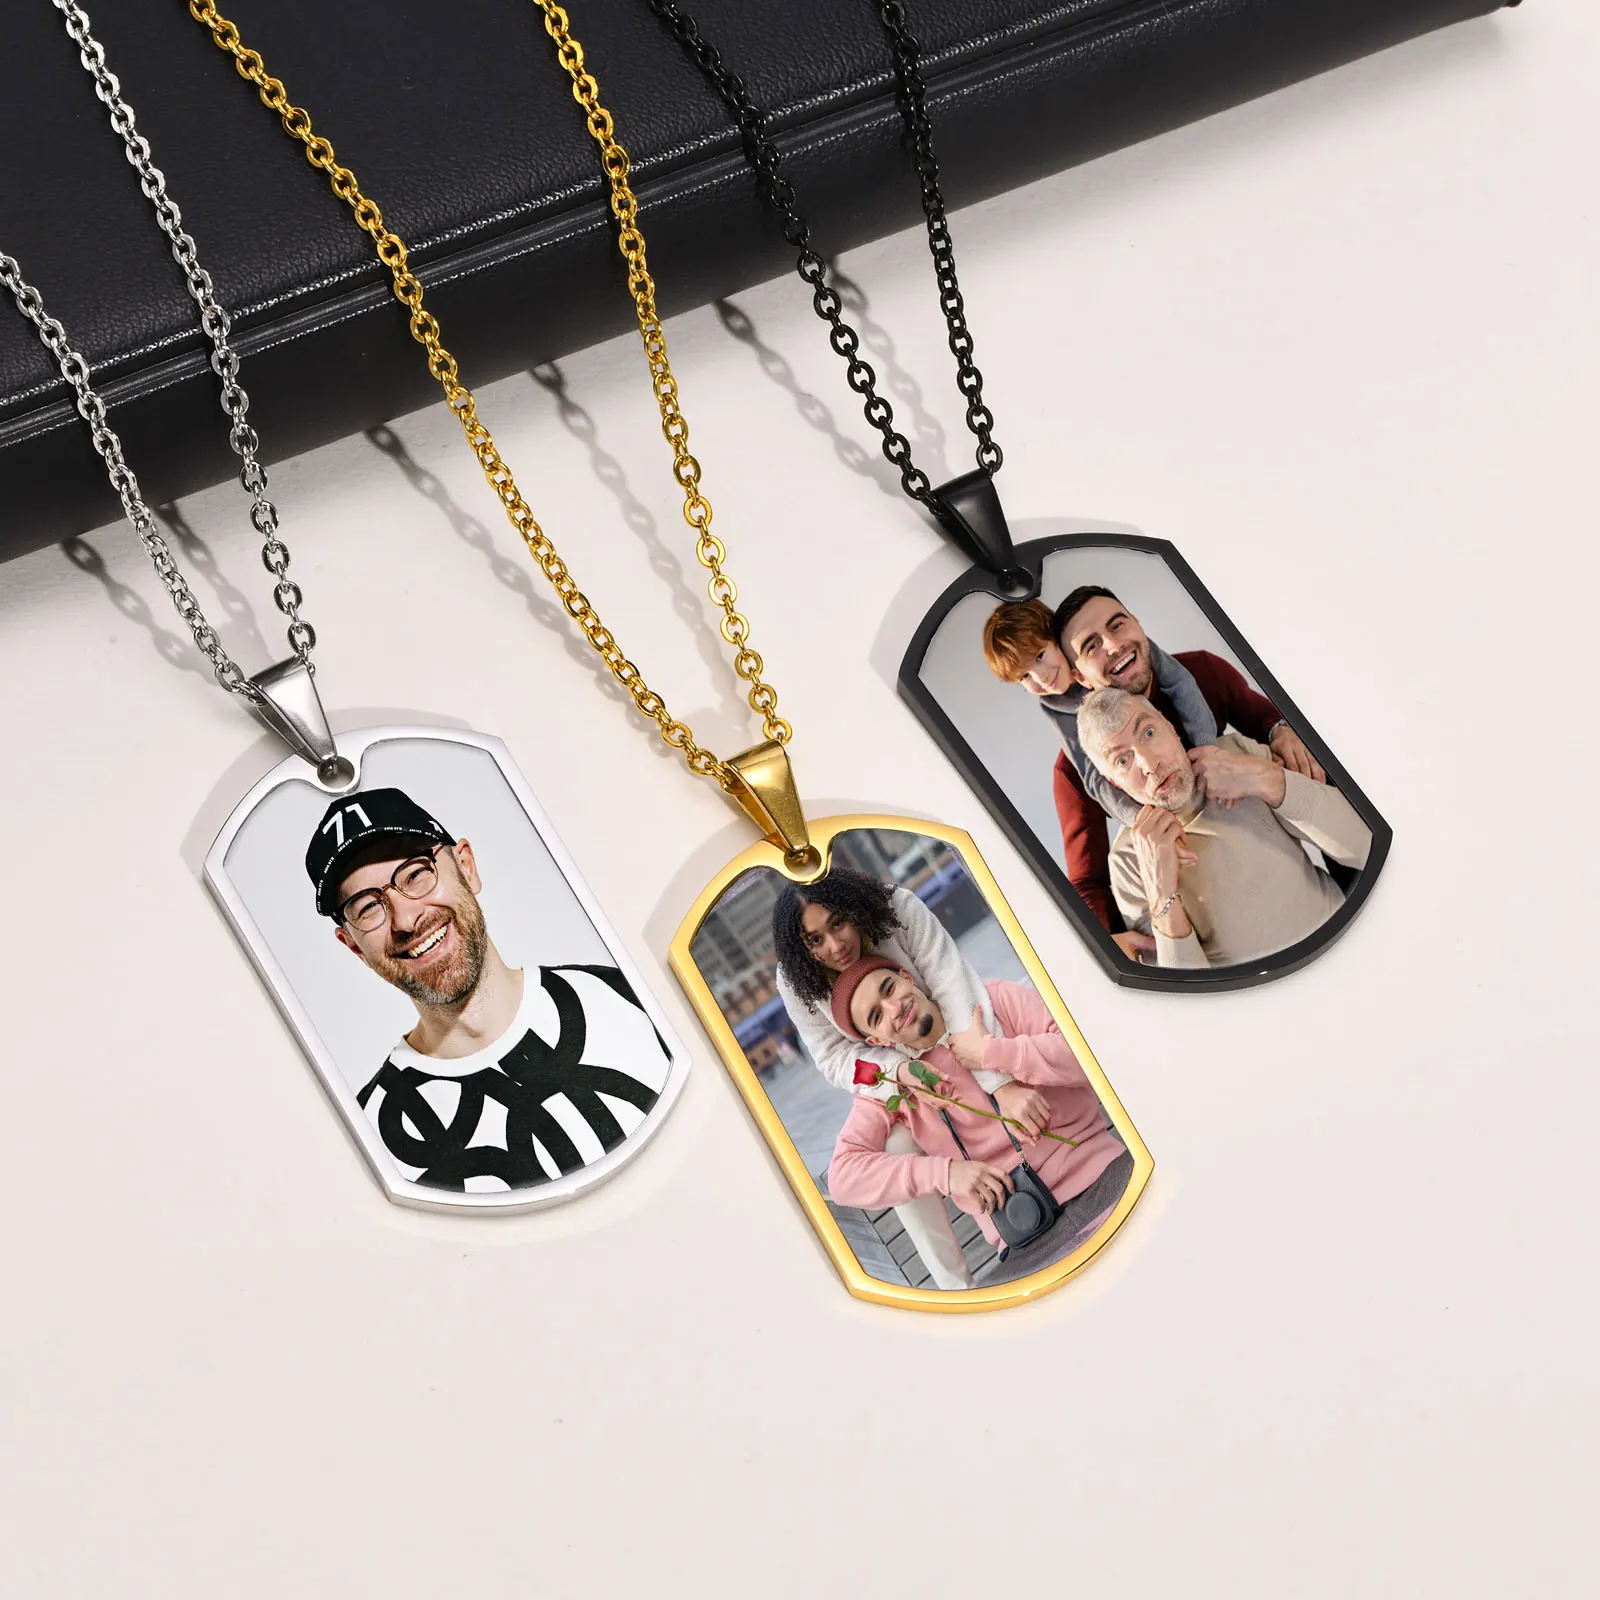 Men Personalize Engrave Name Custom The Photo of Family Pendant Necklaces,Picture Words Date Pendant Dogtag,Love Keepsake Gifts fall in love cow couple treasure keepsake box kiss me